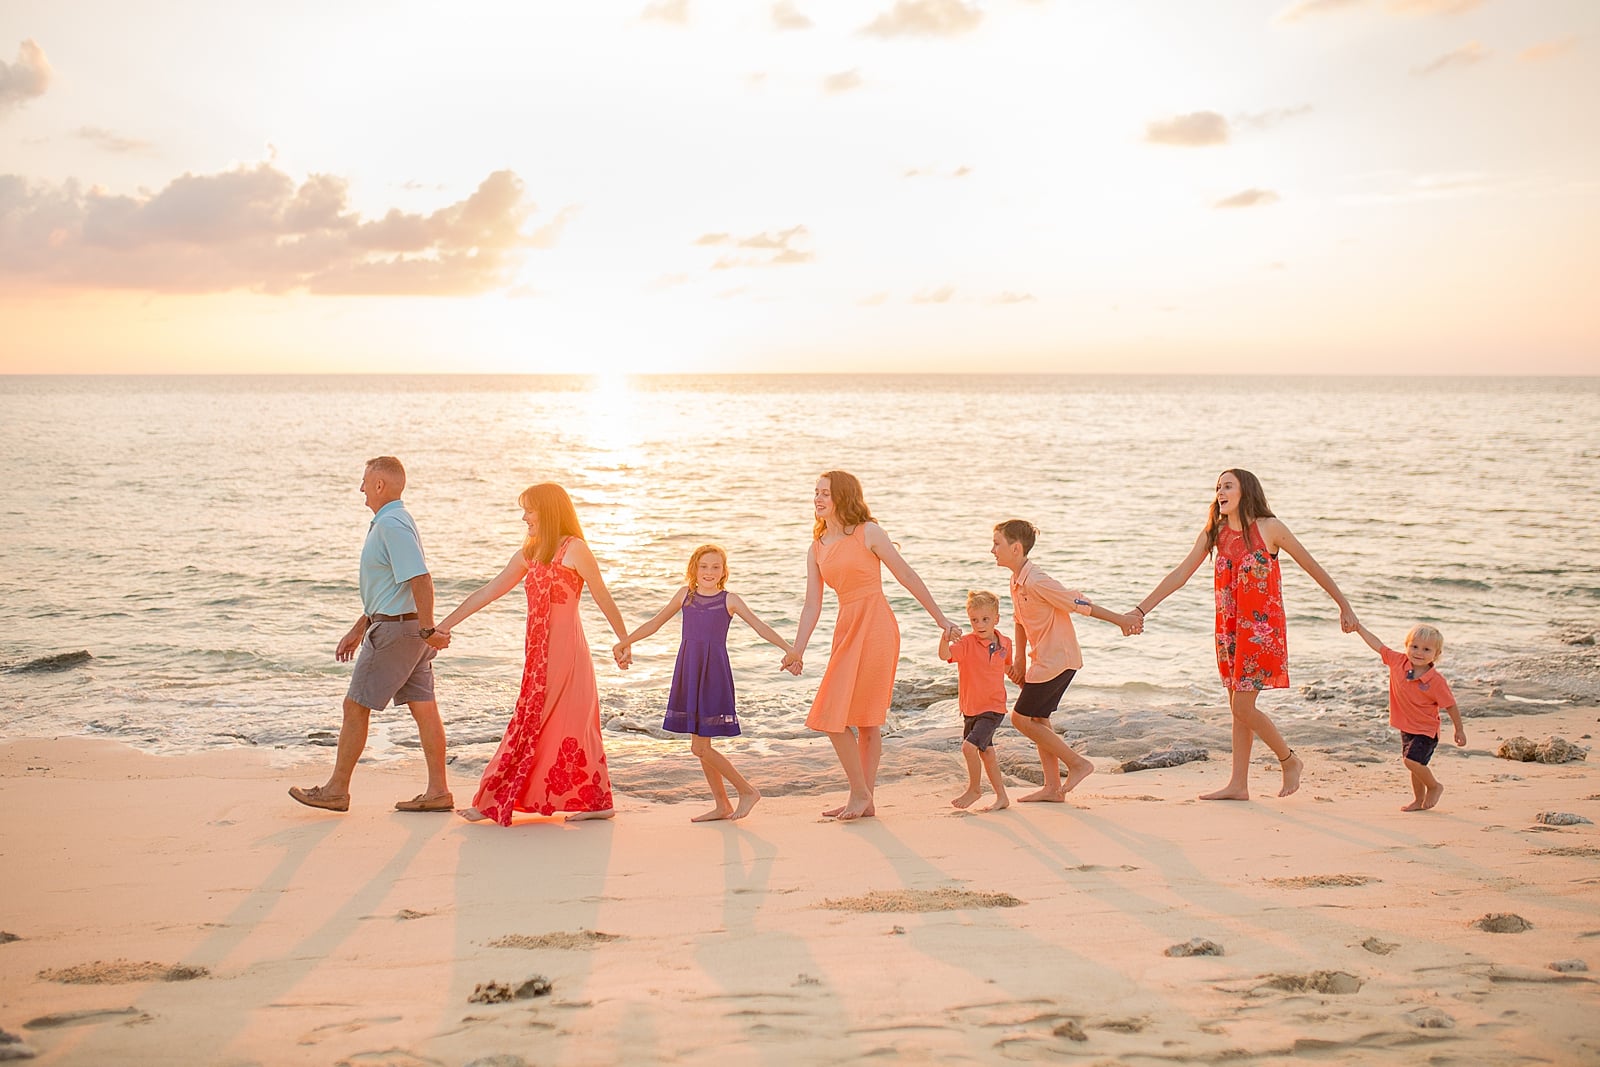 Large family of 8 on the beach at sunset in Yomitan, Okinawa Japan by Alison Bell Photographer